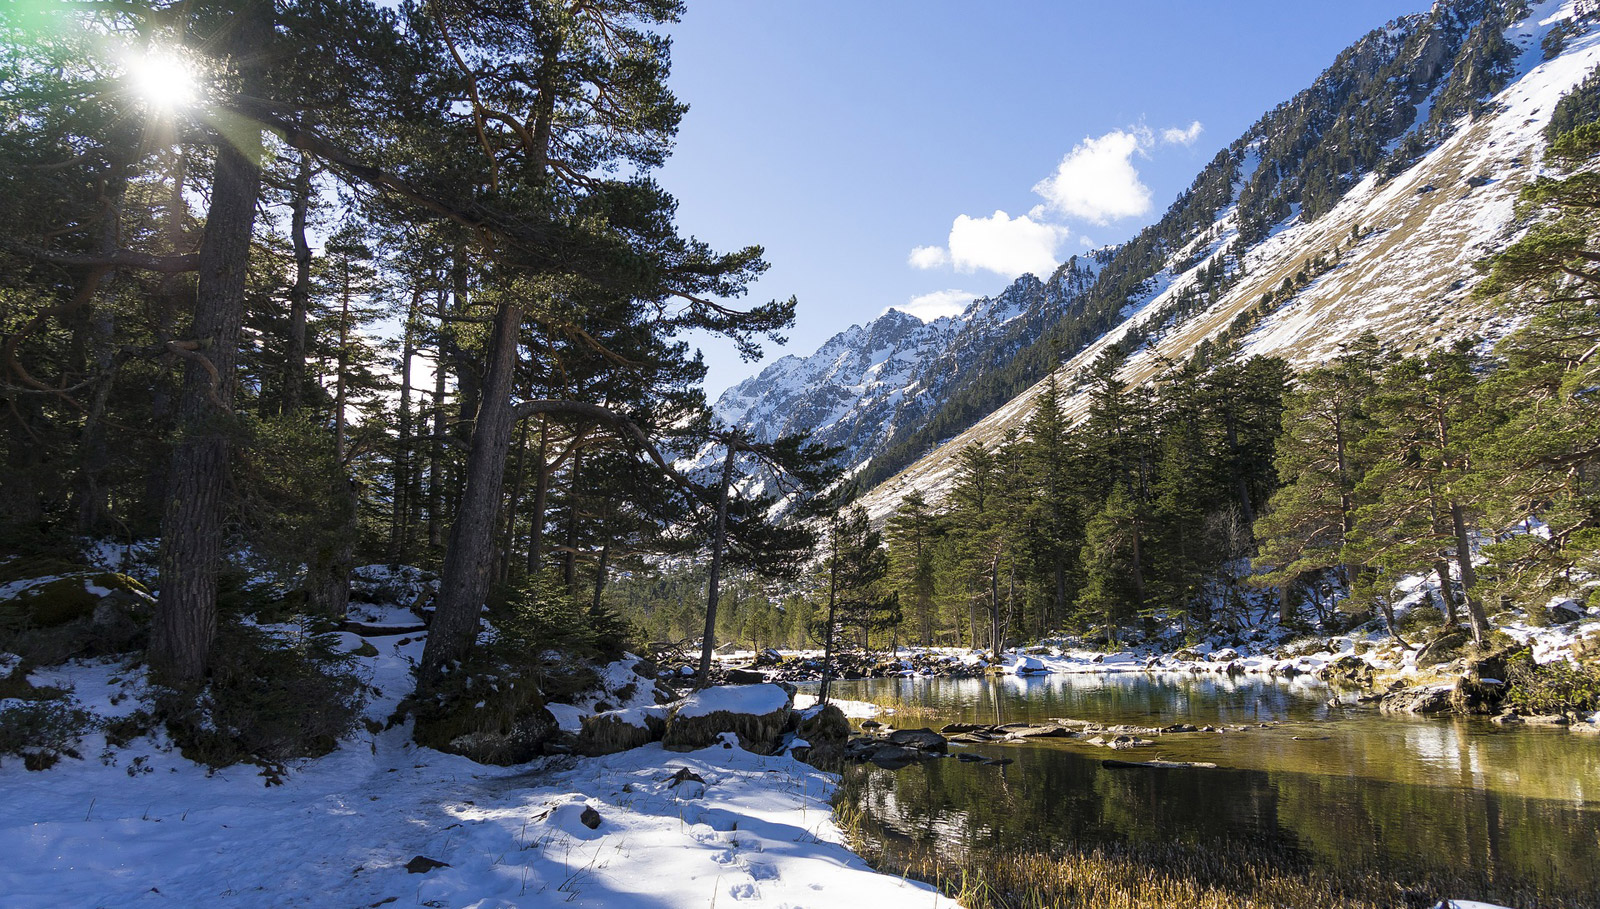 What to do in the Pyrenees in winter?